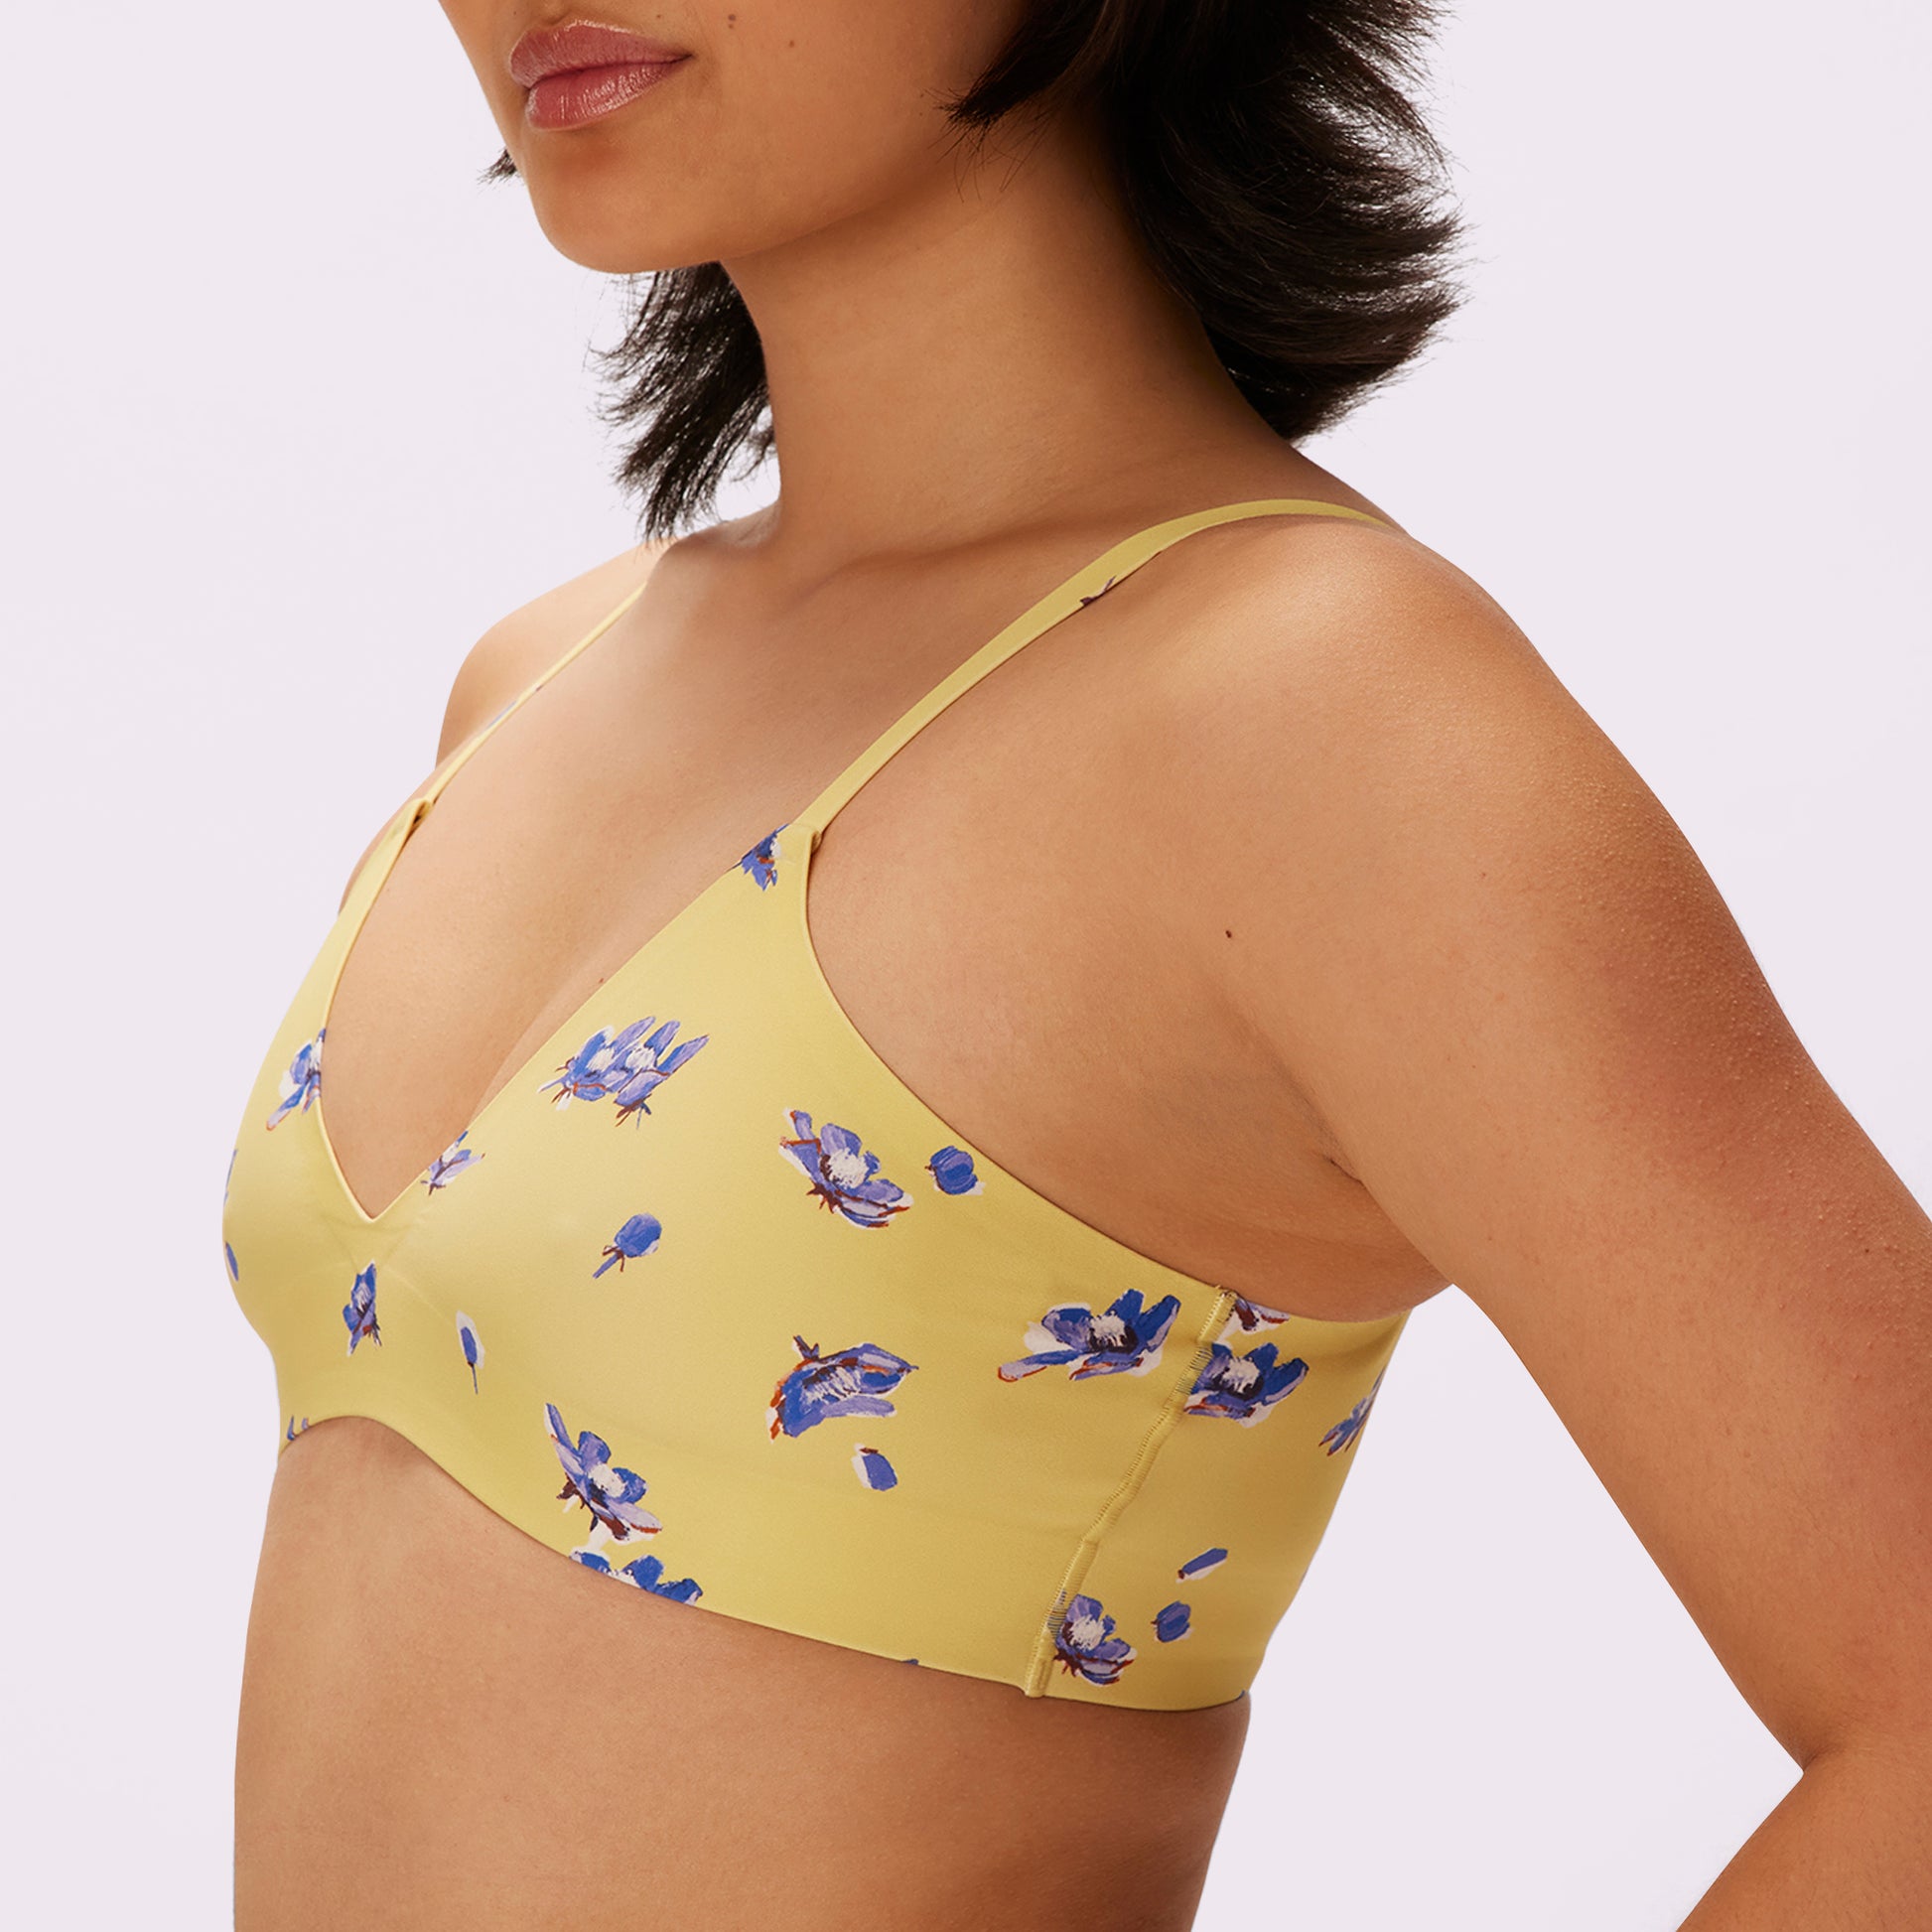 Smoothing Floral Print Full Cup Bra A-E